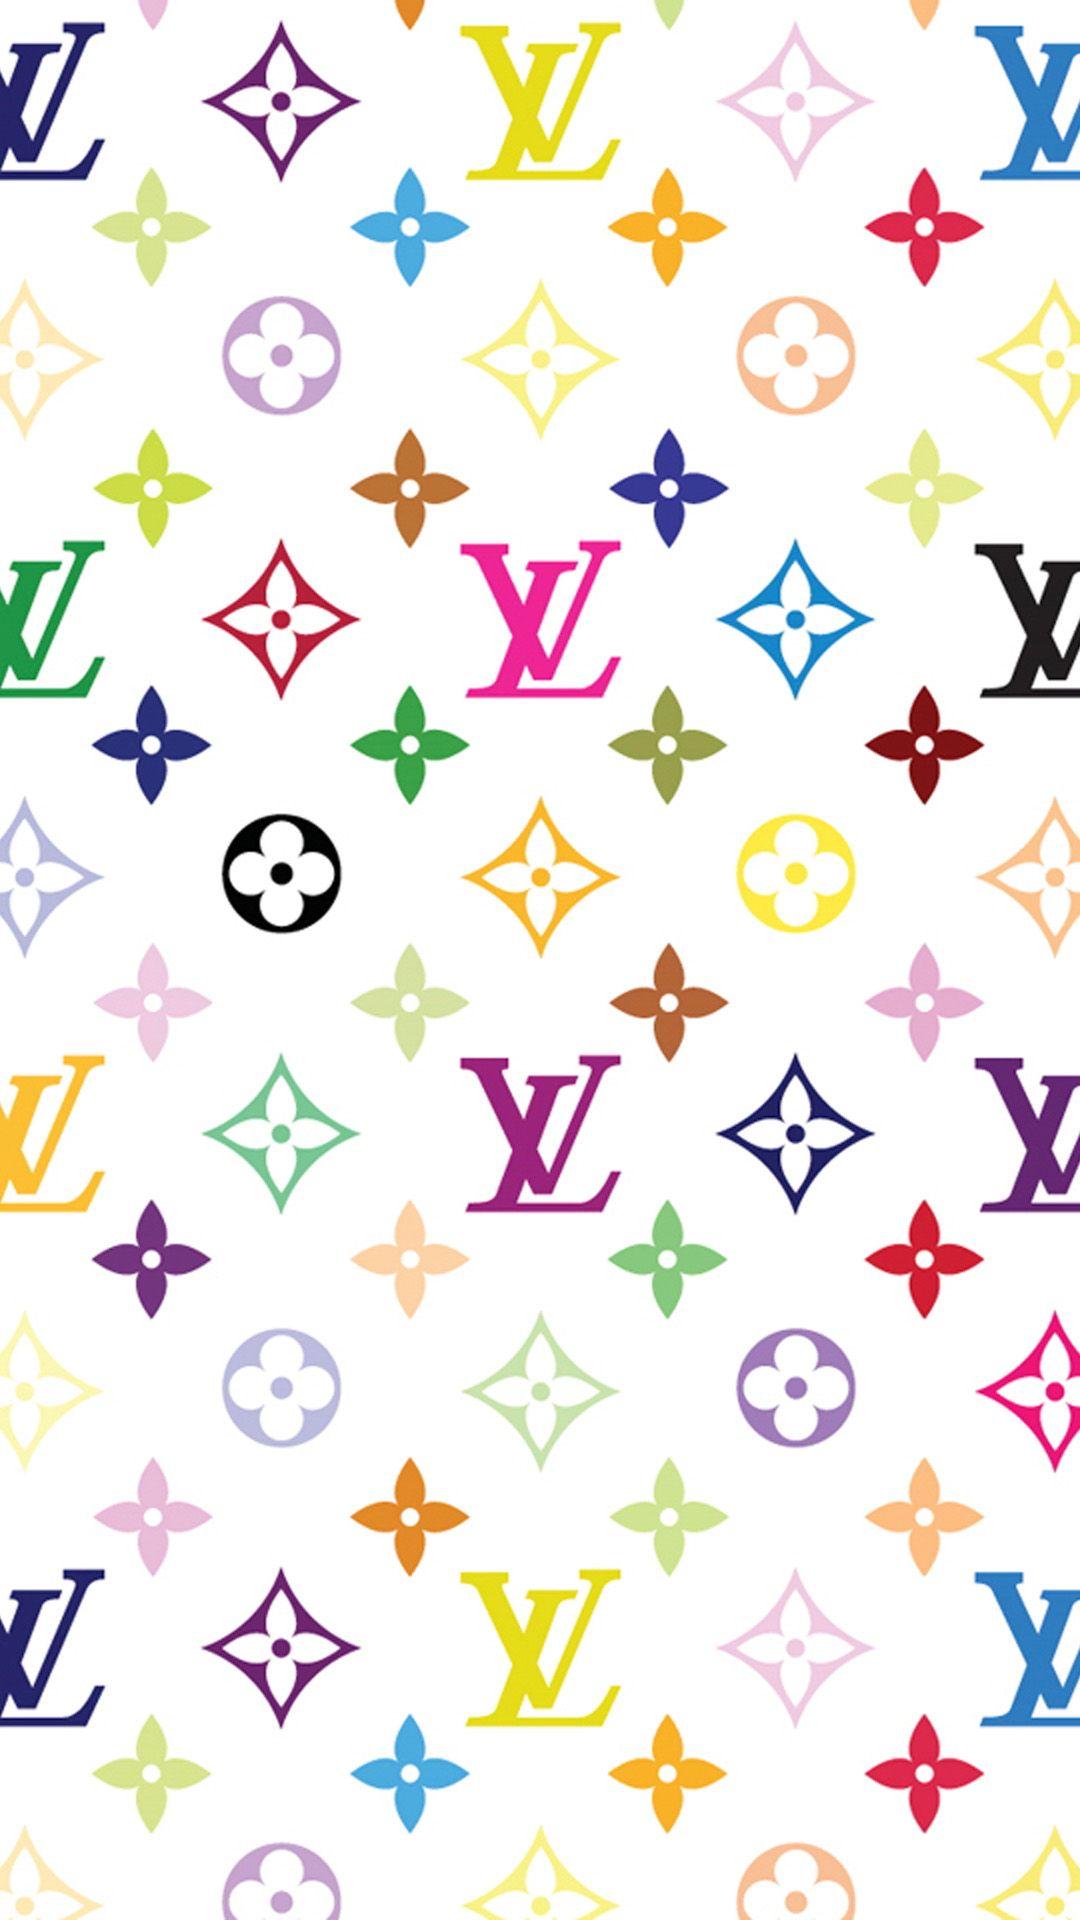 Louis Vuitton iPhone Wallpapers Free Download